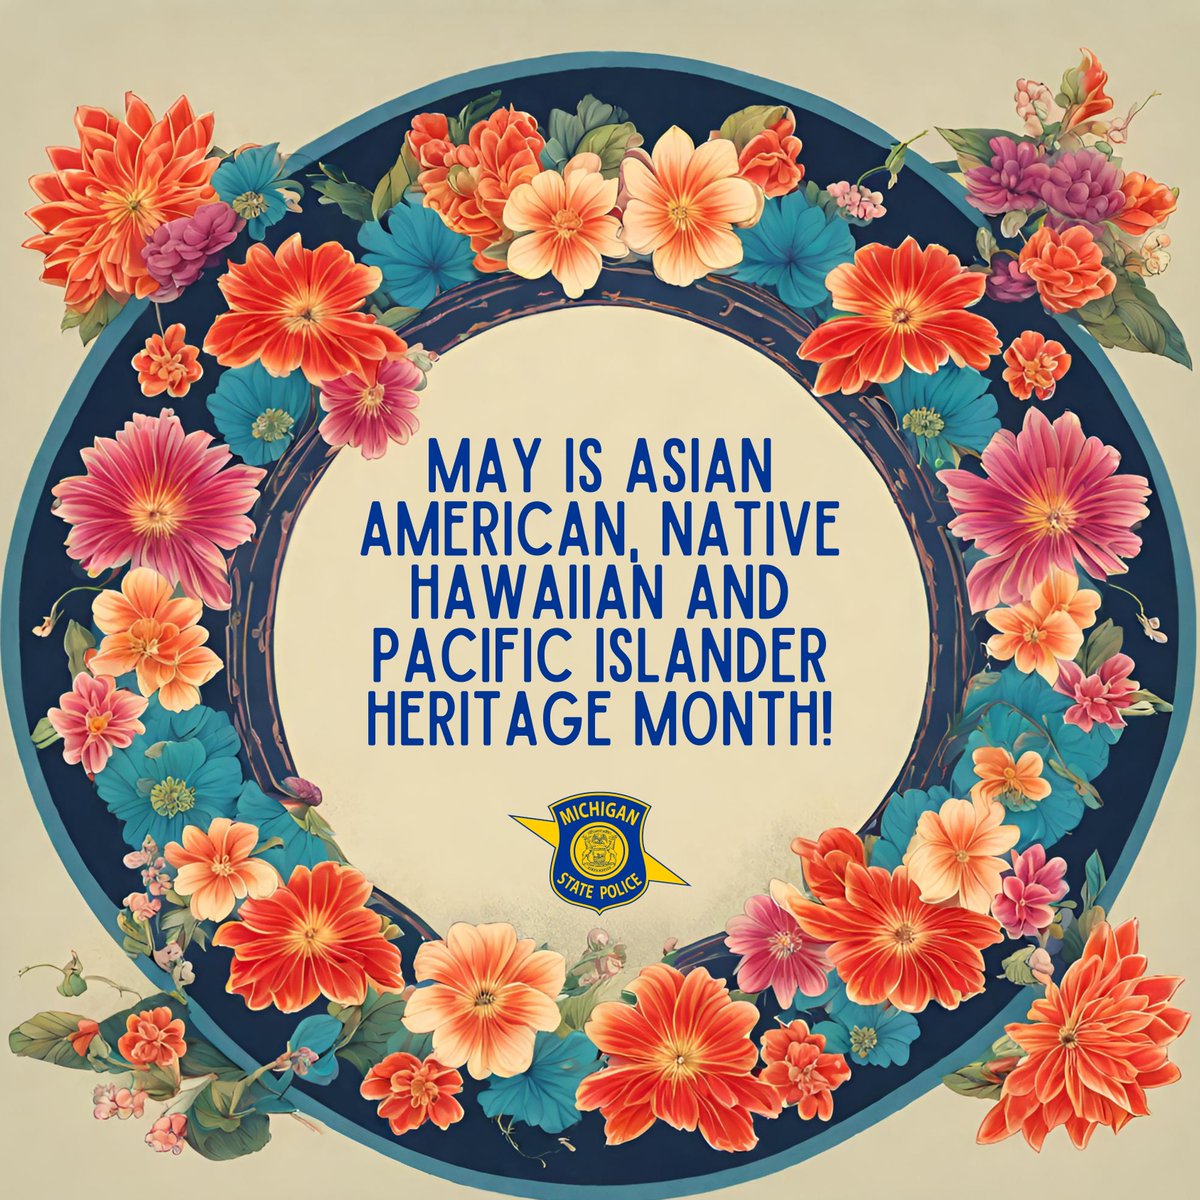 May is Asian American, Native Hawaiian, and Pacific Islander Heritage Month. This month we celebrate the rich cultures, traditions and contributions of our AA and NHPI communities. Learn more at asianpacificheritage.gov. #AANHPIHeritageMonth